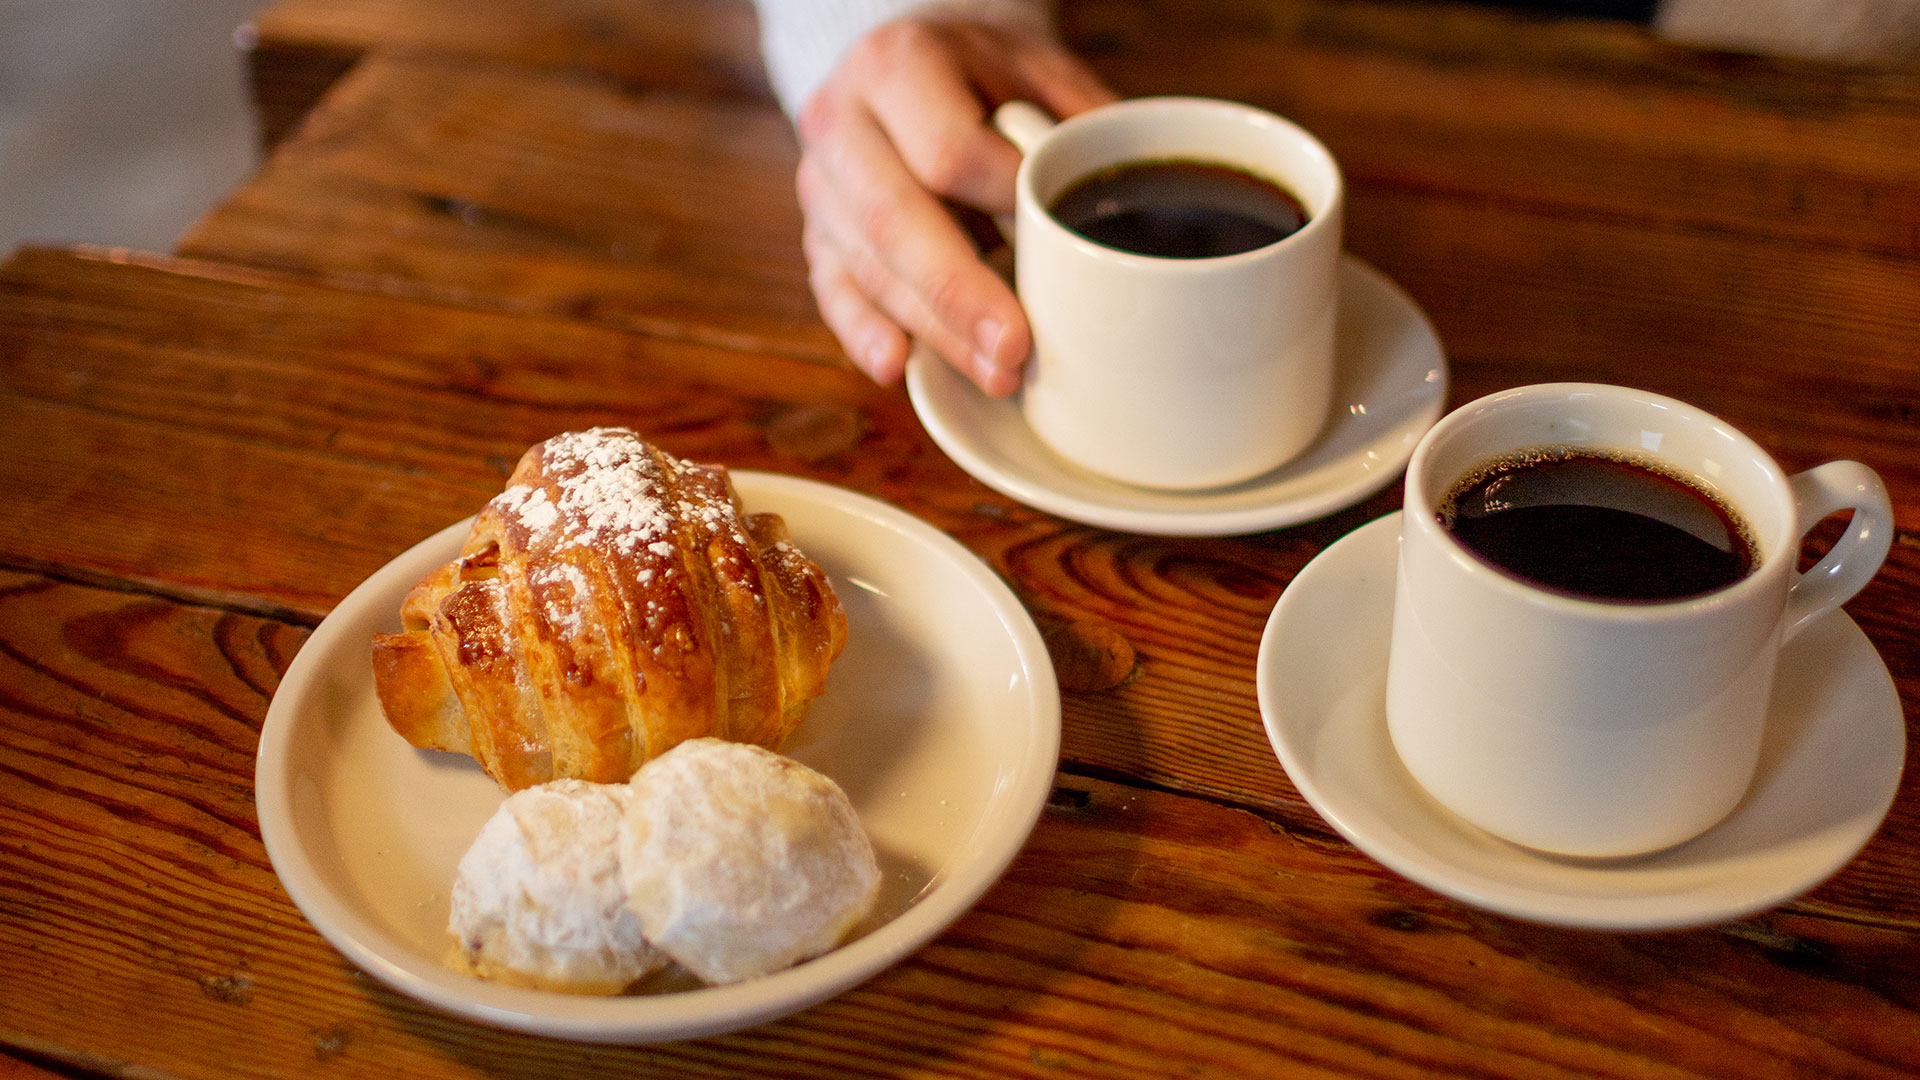 Coffee and croissants from Prosperity Kitchen and Pantry.